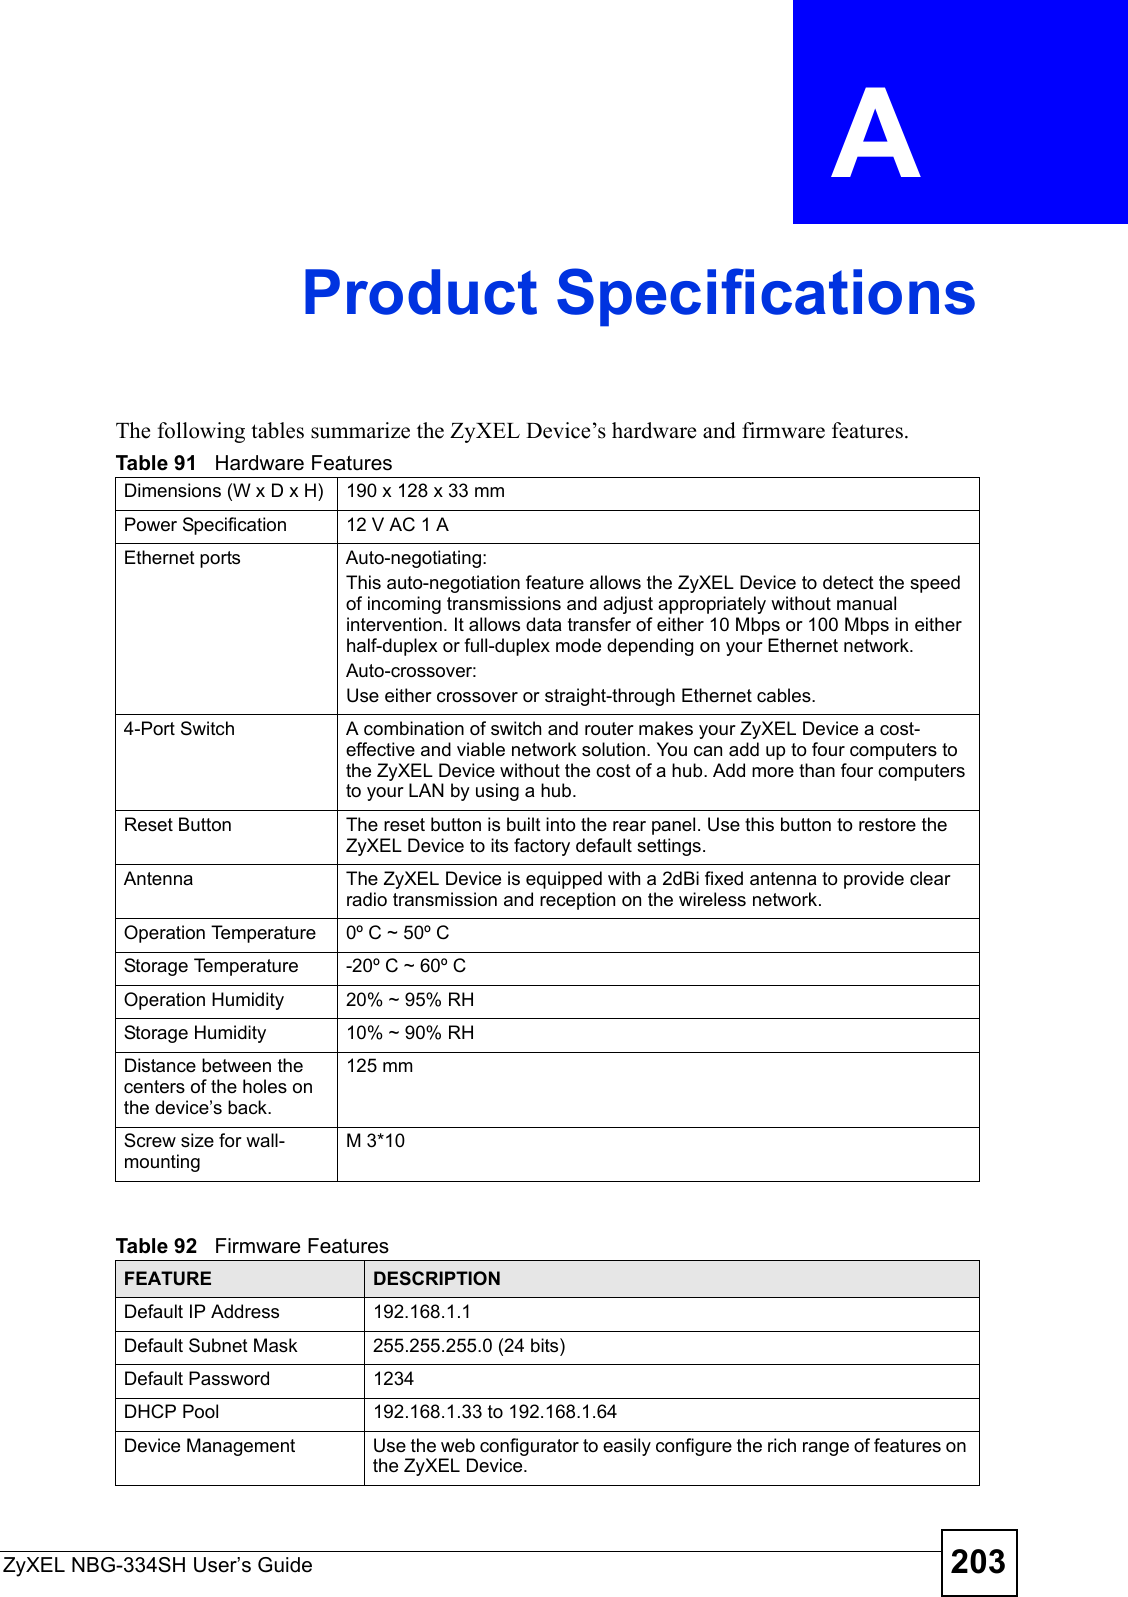 ZyXEL NBG-334SH User’s Guide 203APPENDIX  A Product SpecificationsThe following tables summarize the ZyXEL Device’s hardware and firmware features.Table 91   Hardware FeaturesDimensions (W x D x H)  190 x 128 x 33 mmPower Specification 12 V AC 1 AEthernet ports Auto-negotiating: This auto-negotiation feature allows the ZyXEL Device to detect the speed of incoming transmissions and adjust appropriately without manual intervention. It allows data transfer of either 10 Mbps or 100 Mbps in either half-duplex or full-duplex mode depending on your Ethernet network.Auto-crossover: Use either crossover or straight-through Ethernet cables.4-Port Switch A combination of switch and router makes your ZyXEL Device a cost-effective and viable network solution. You can add up to four computers to the ZyXEL Device without the cost of a hub. Add more than four computers to your LAN by using a hub.Reset Button The reset button is built into the rear panel. Use this button to restore the ZyXEL Device to its factory default settings.Antenna The ZyXEL Device is equipped with a 2dBi fixed antenna to provide clear radio transmission and reception on the wireless network. Operation Temperature 0º C ~ 50º CStorage Temperature -20º C ~ 60º COperation Humidity 20% ~ 95% RHStorage Humidity 10% ~ 90% RHDistance between the centers of the holes on the device’s back.125 mmScrew size for wall-mountingM 3*10Table 92   Firmware FeaturesFEATURE DESCRIPTIONDefault IP Address 192.168.1.1Default Subnet Mask 255.255.255.0 (24 bits)Default Password 1234DHCP Pool 192.168.1.33 to 192.168.1.64 Device Management Use the web configurator to easily configure the rich range of features on the ZyXEL Device.